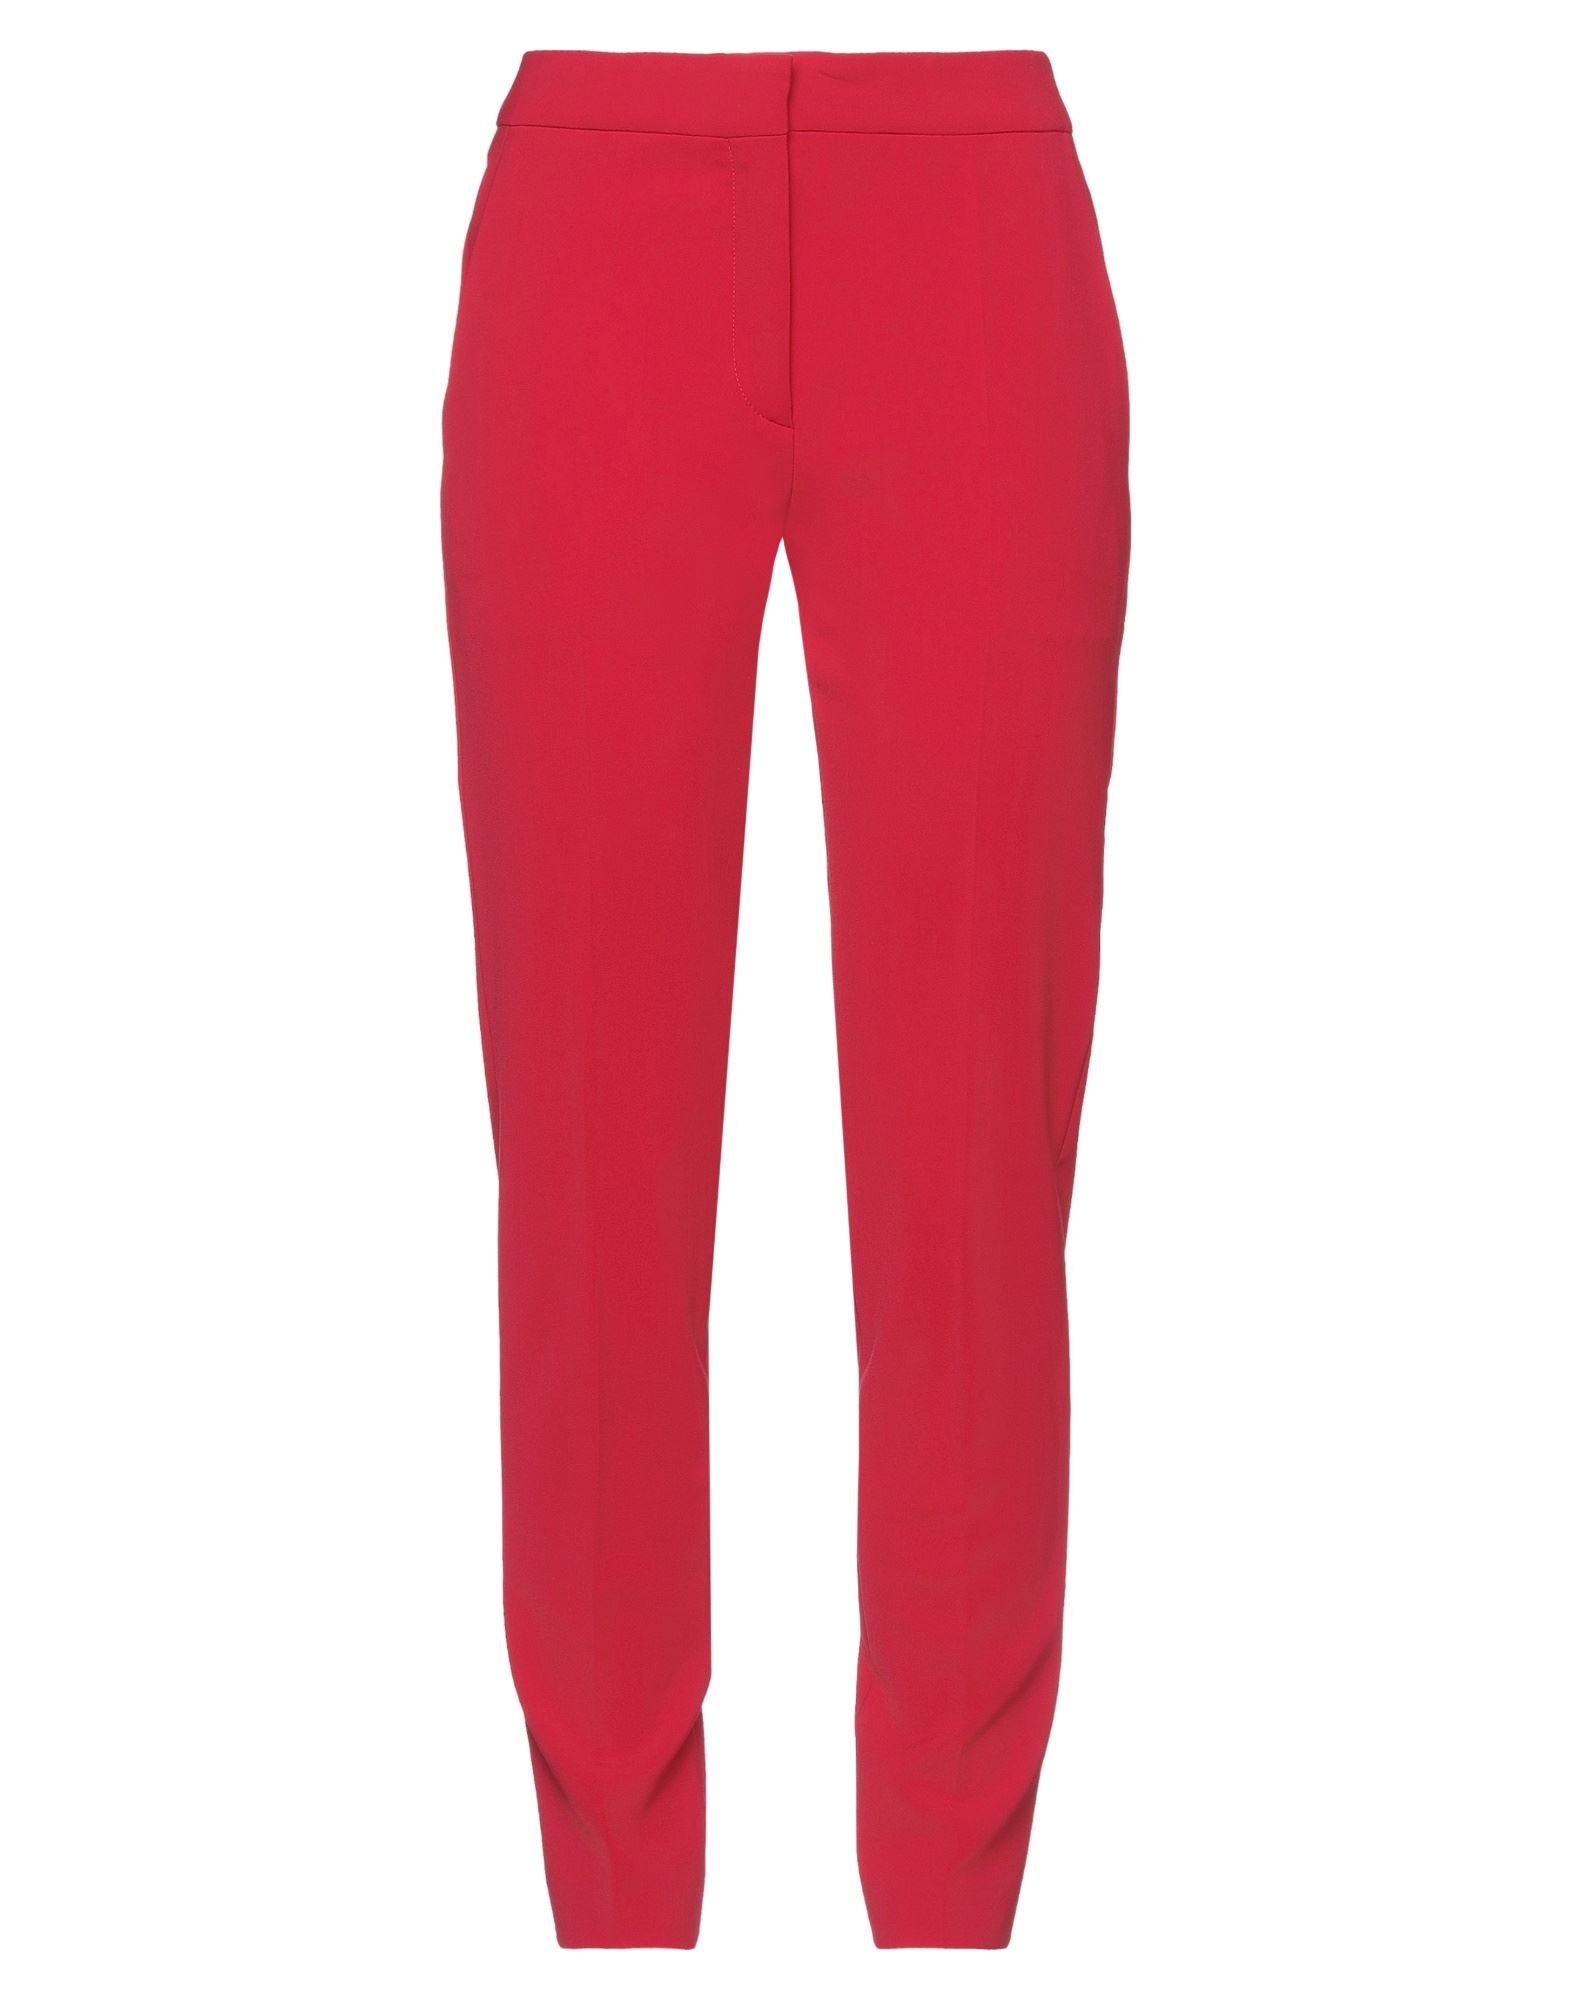 MOSCHINO MOSCHINO WOMAN PANTS RED SIZE 8 POLYESTER, POLYURETHANE